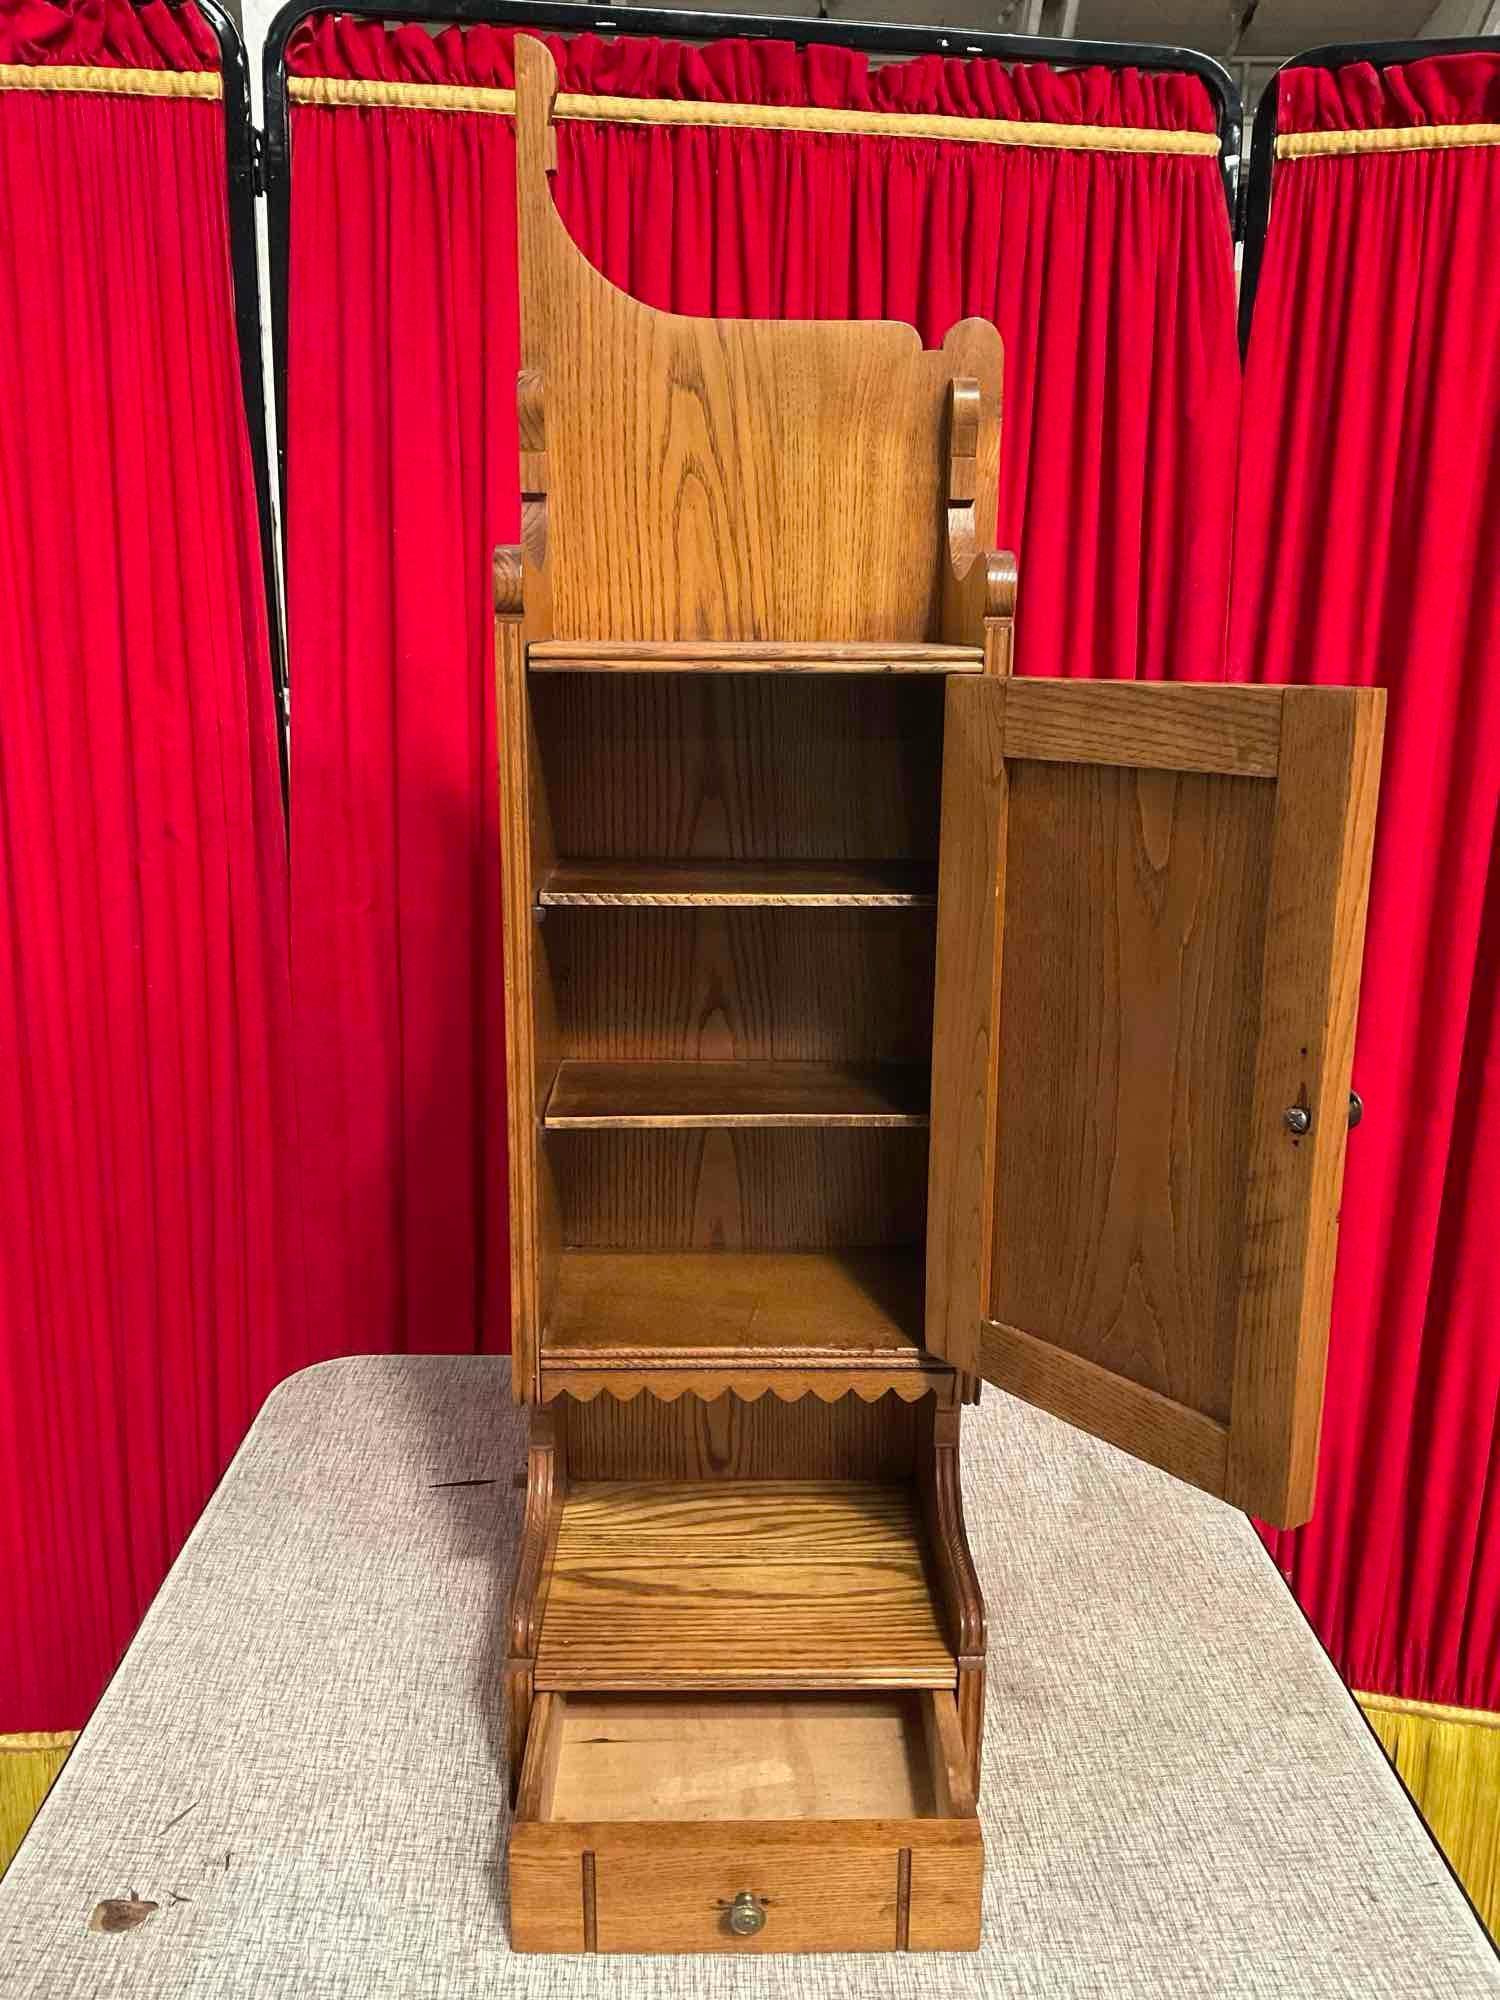 Vintage Wooden Telephone Cupboard w/ 2 Shelves & Drawer. No Phone. Stands 38" Tall. See pics.